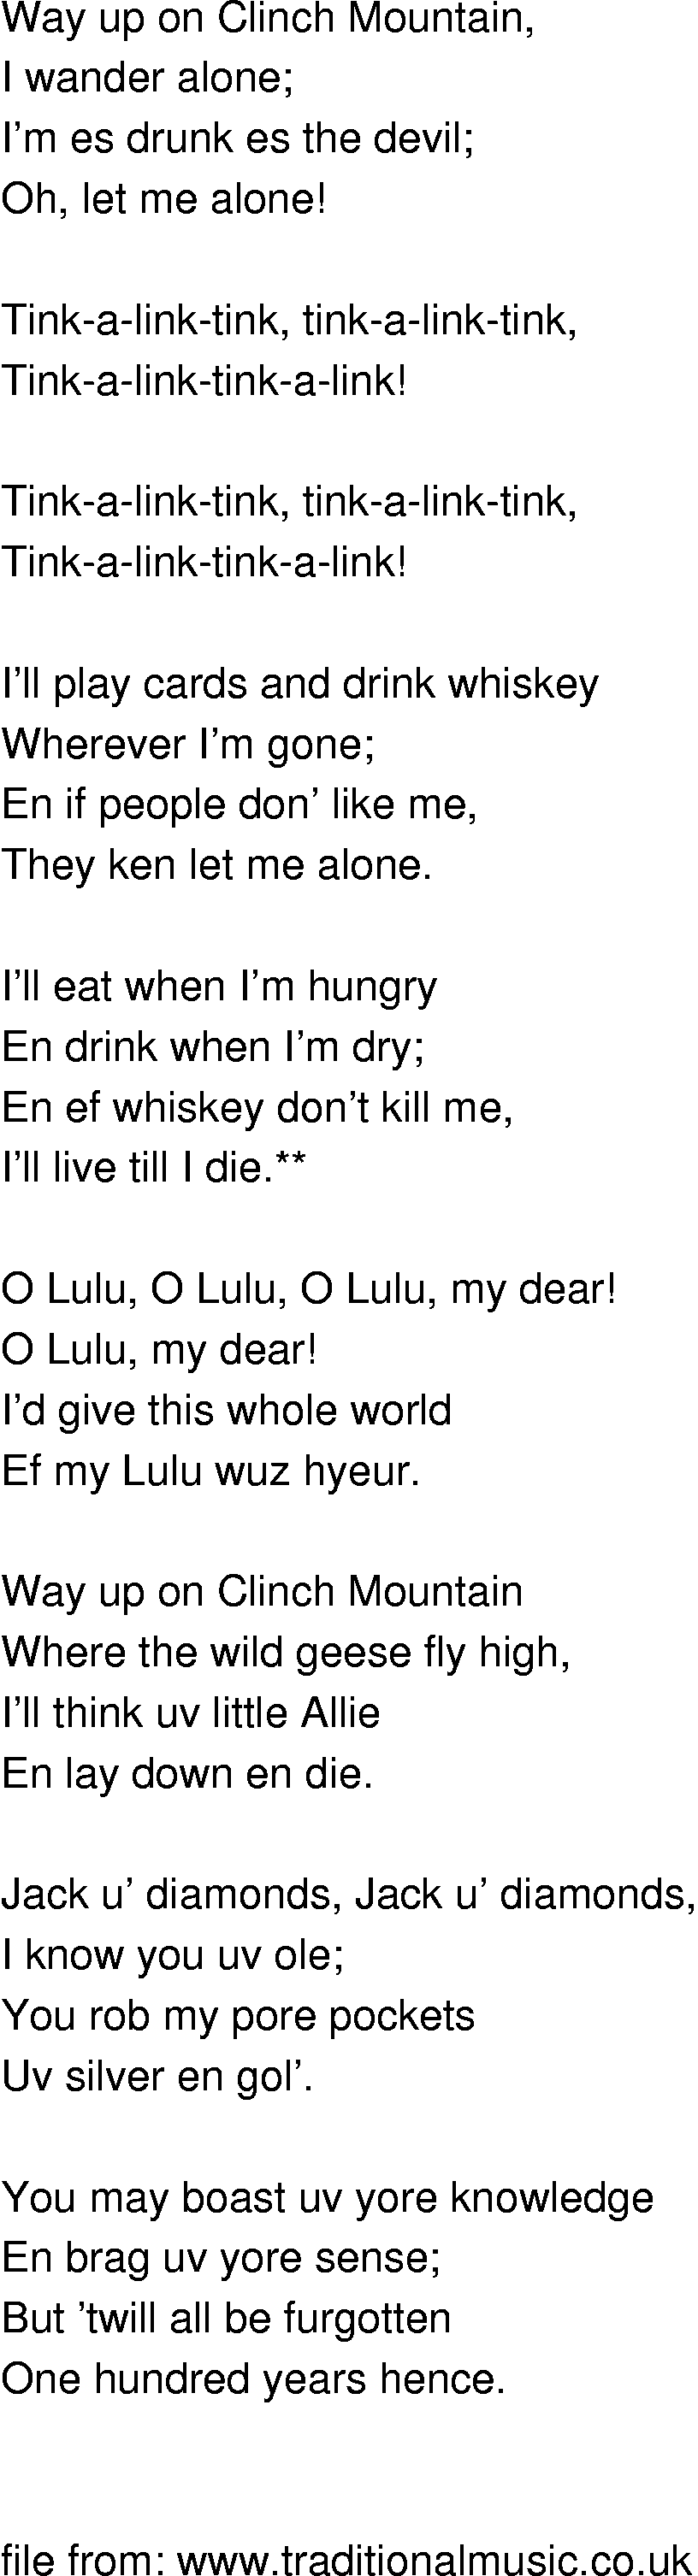 Old-Time (oldtimey) Song Lyrics - way up on clinch mountain